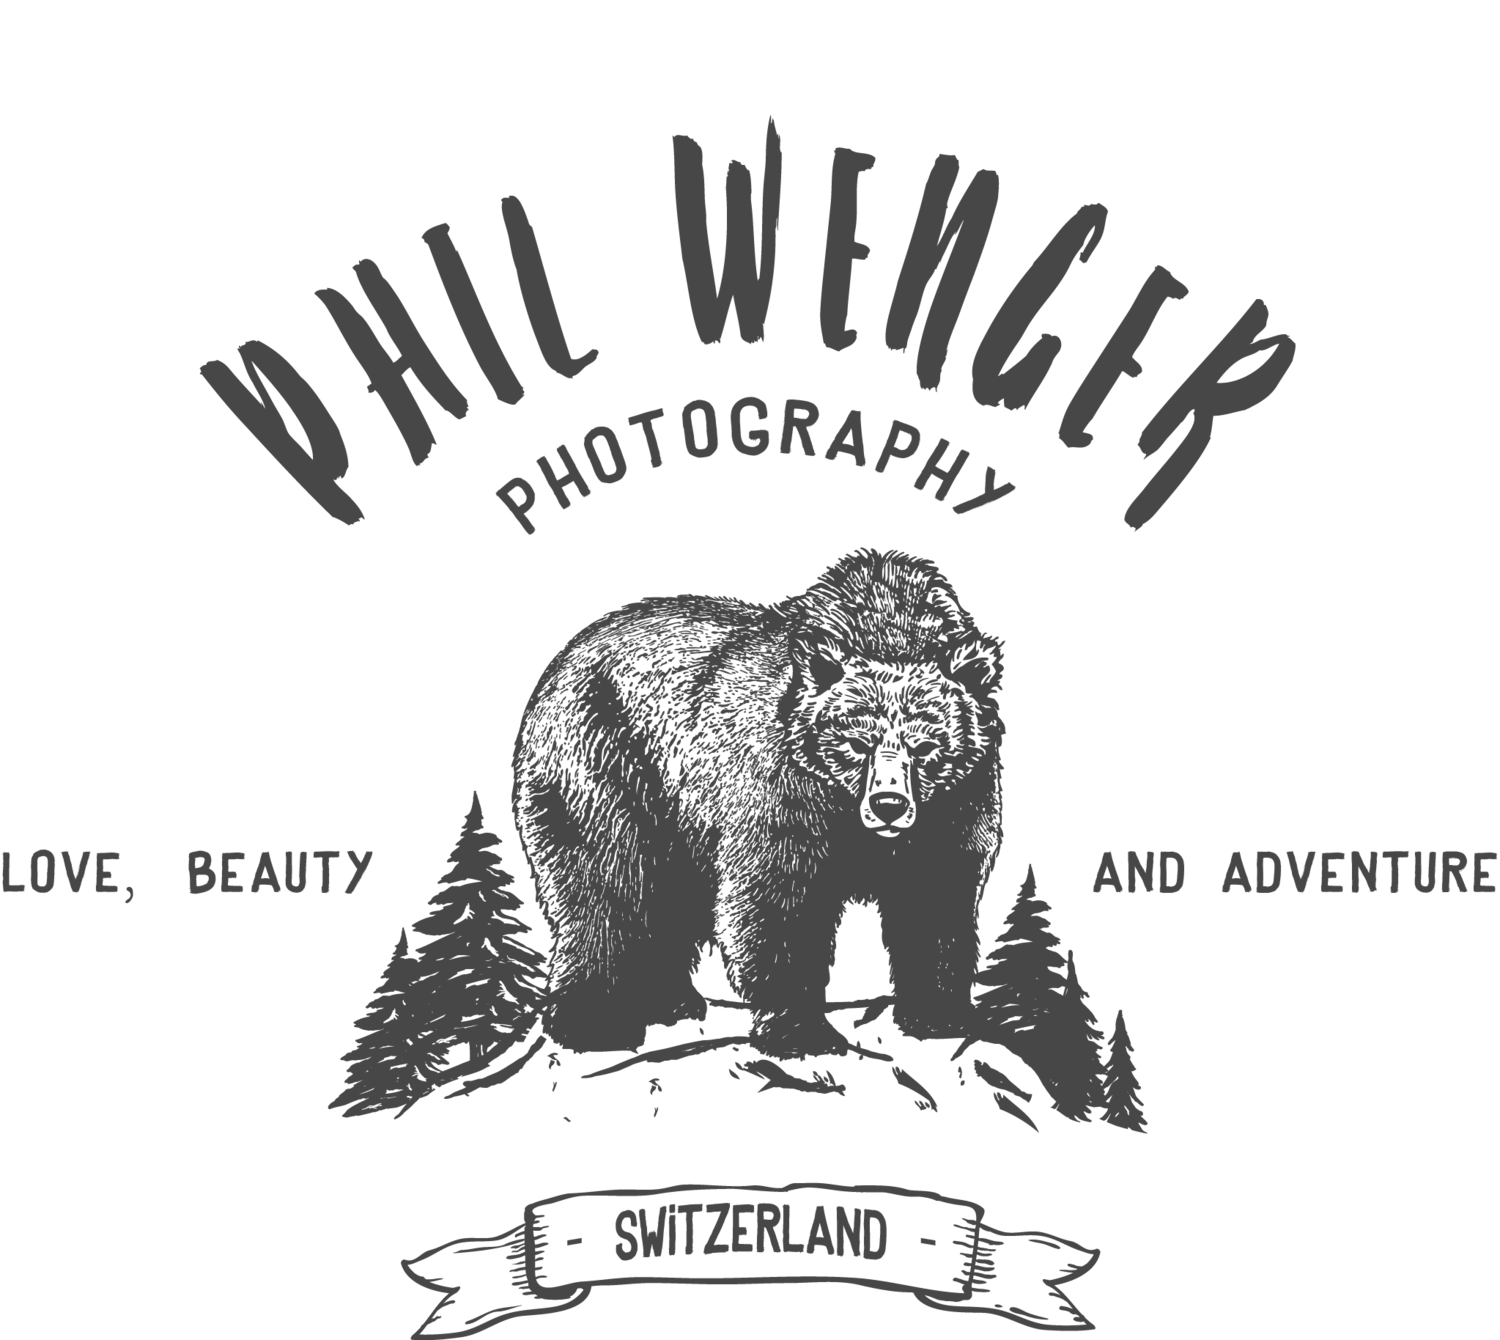 Phil Wenger Photography